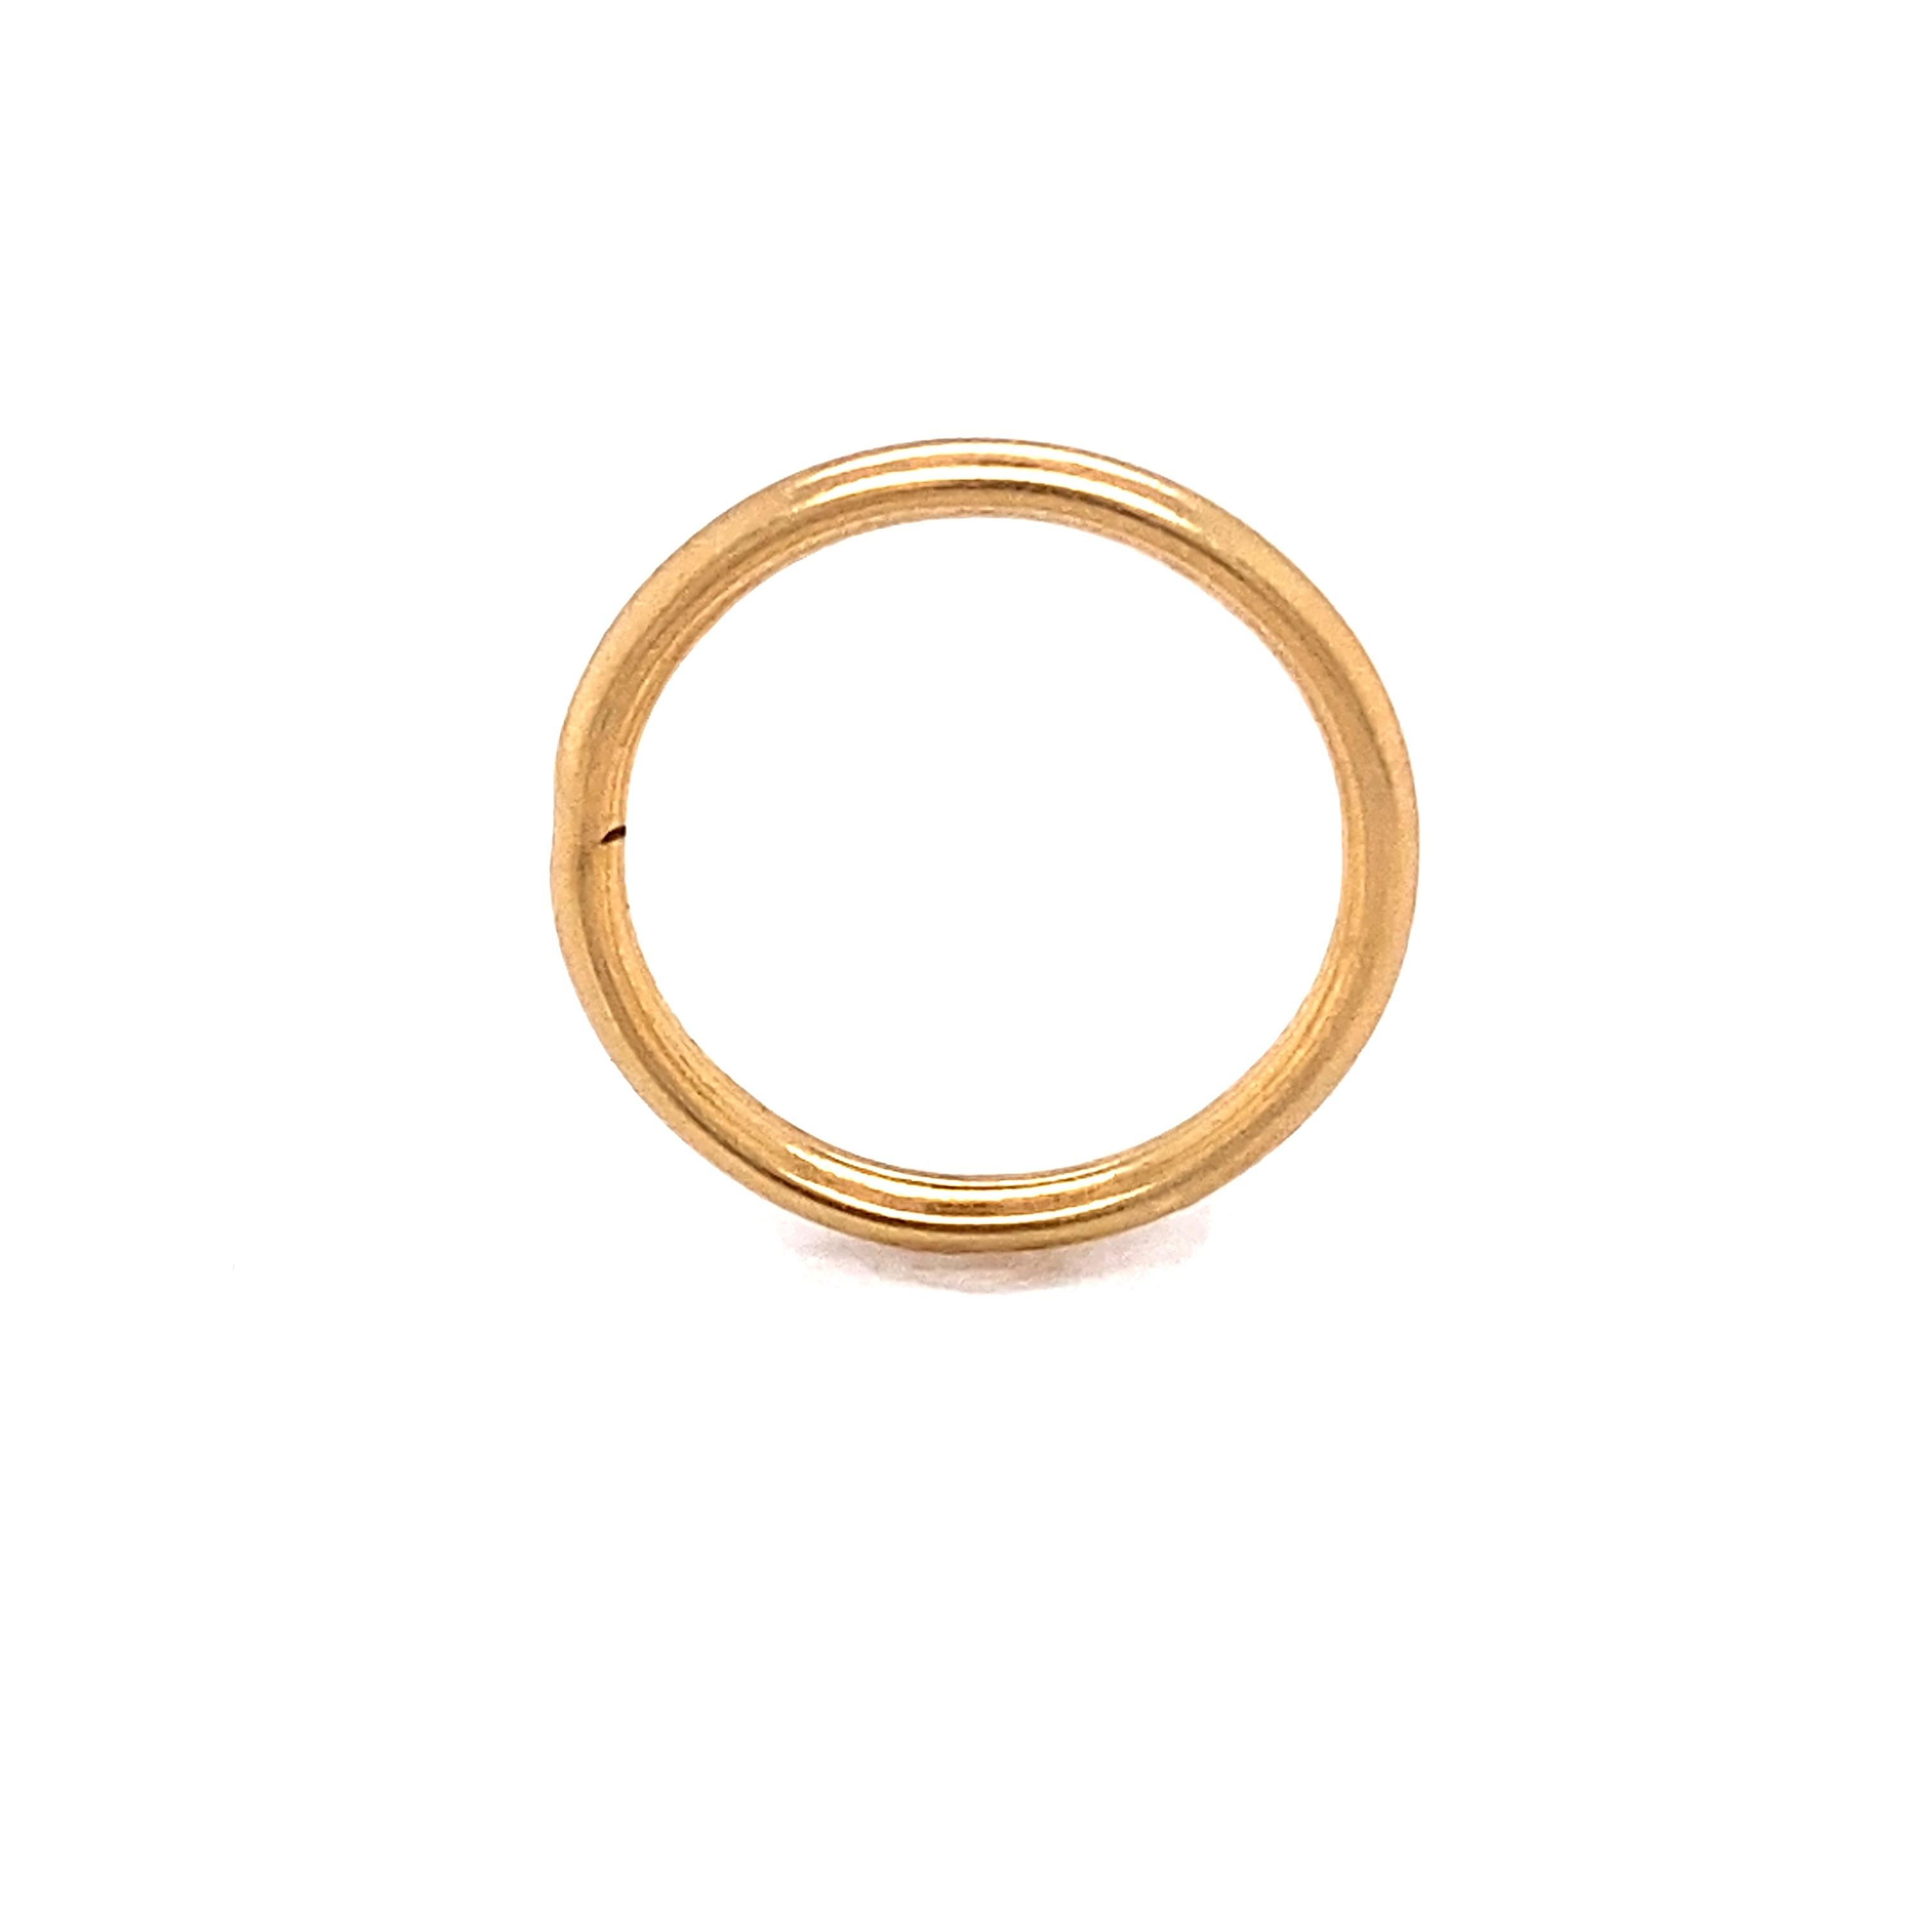 Item Details:
Metal type: 18 Karat Yellow Gold 
Weight: 2 grams 
Size: 4, Sizable

Item Features:
This is a simple yet elegant Tiffany & Co. band ring. Very well made ring in great condition with a smooth gold finish. Great for everyday wear, would